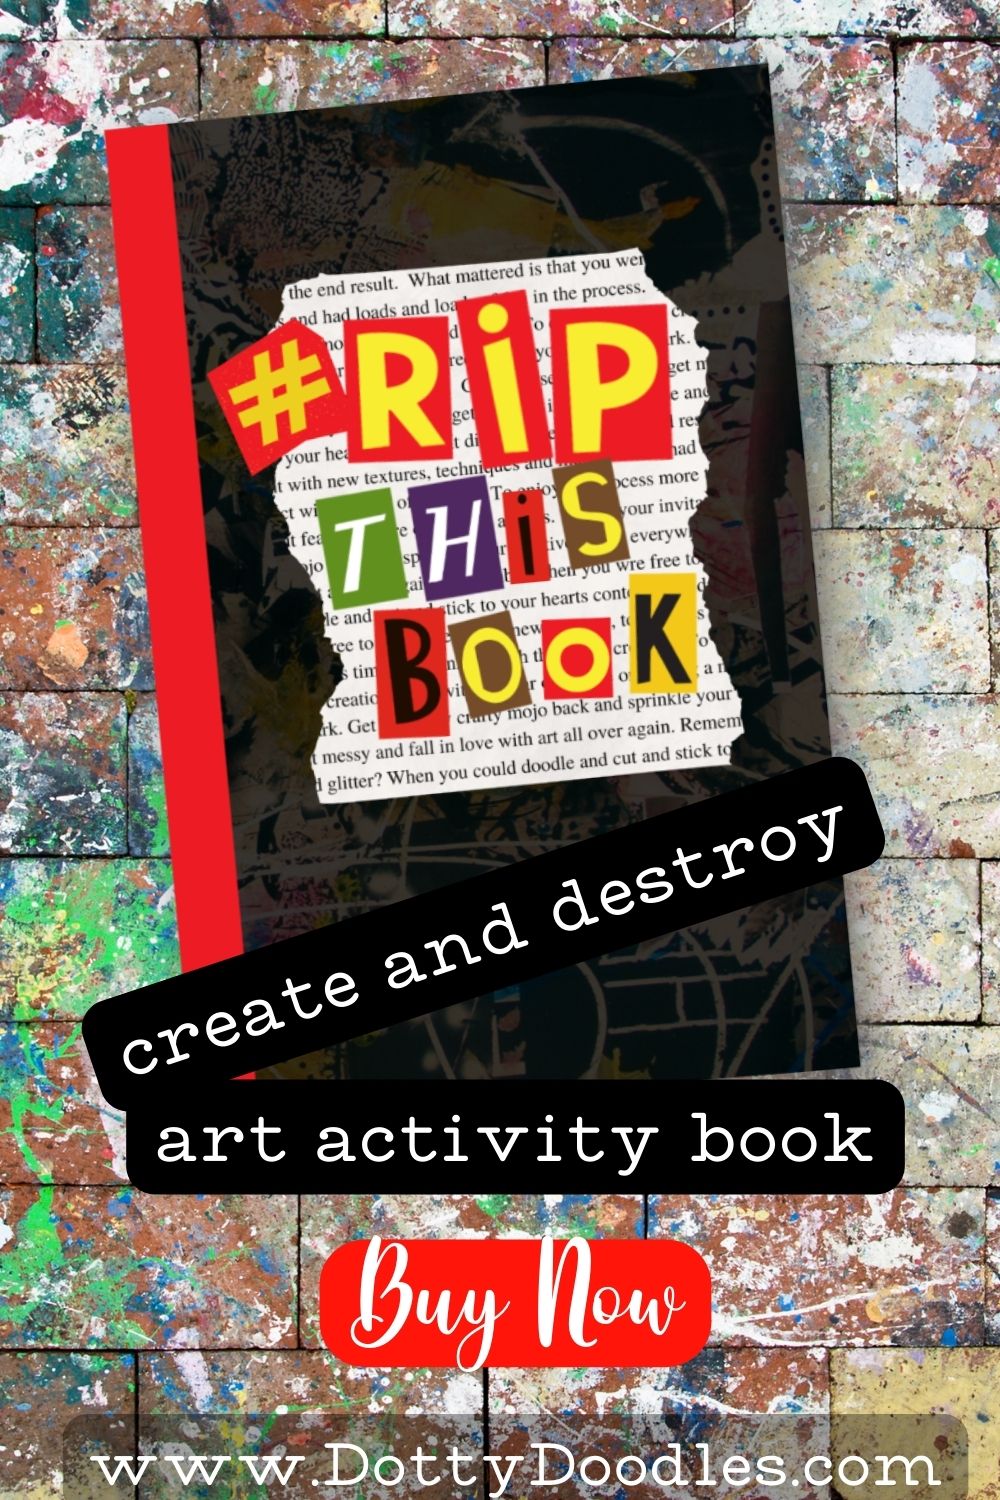 Rip this book create and destroy art activity book text on a wooden background splattered with paint